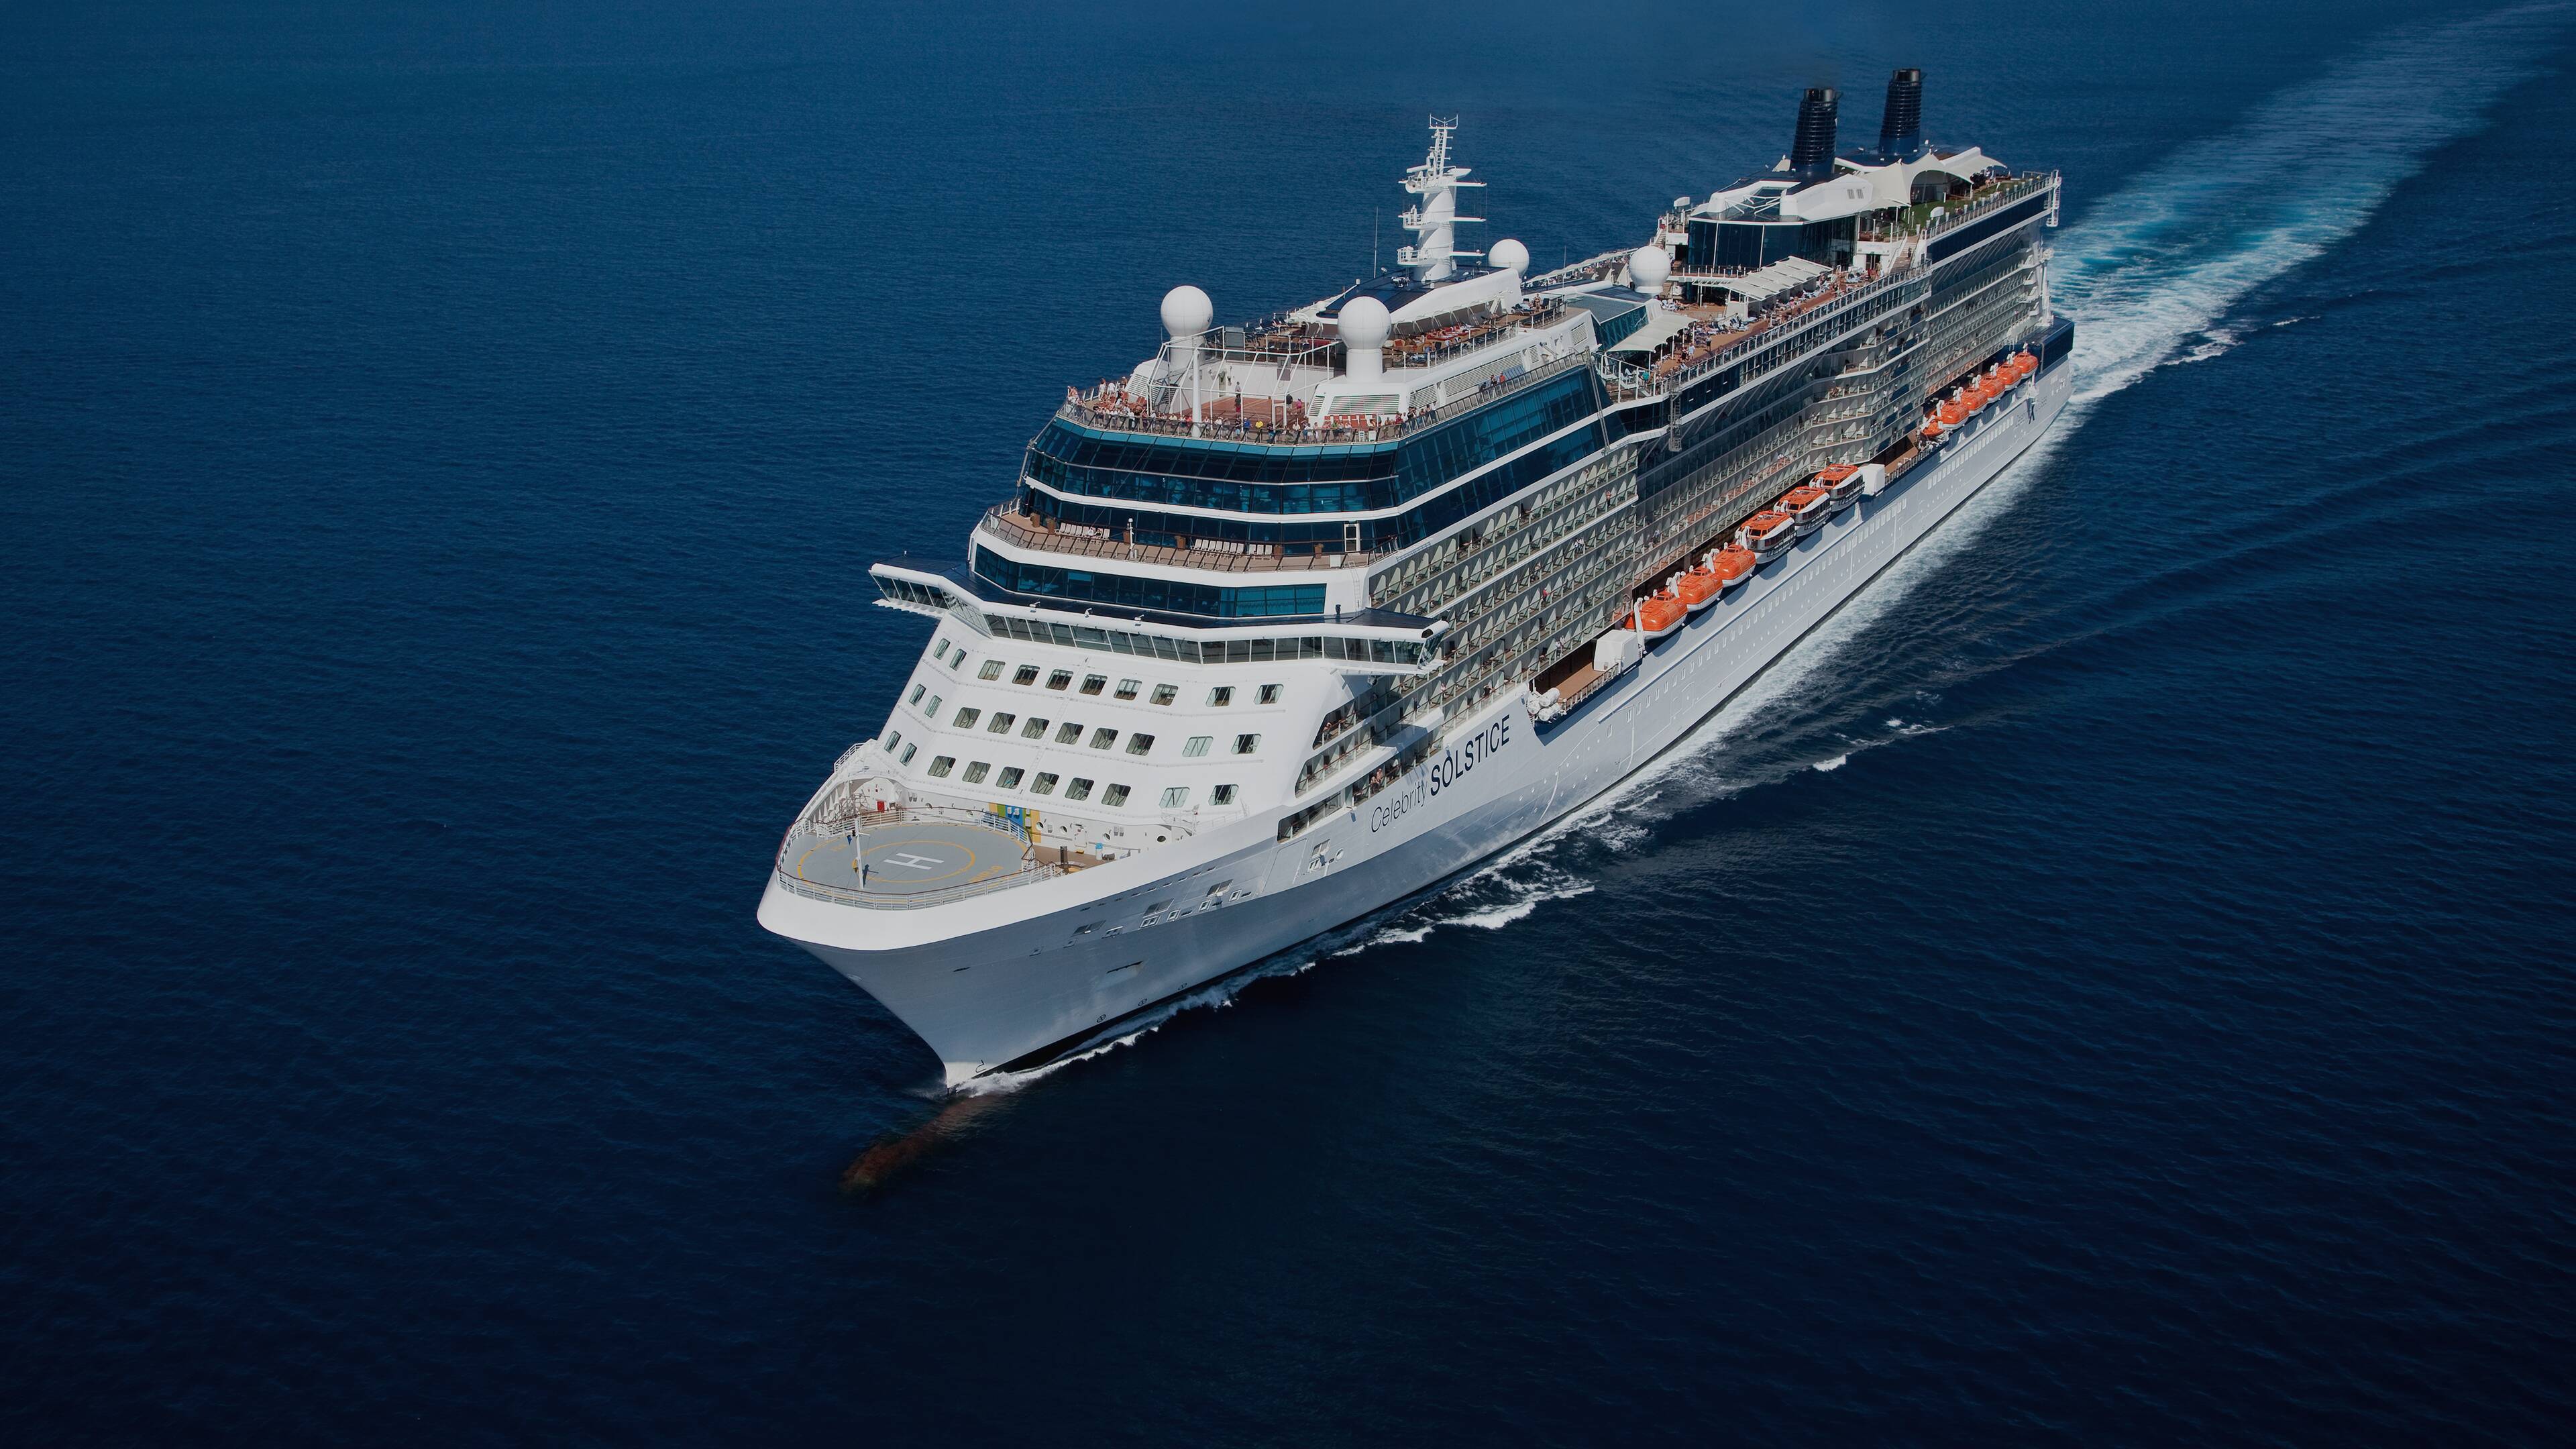 celebrity cruise 24 hour cancellation